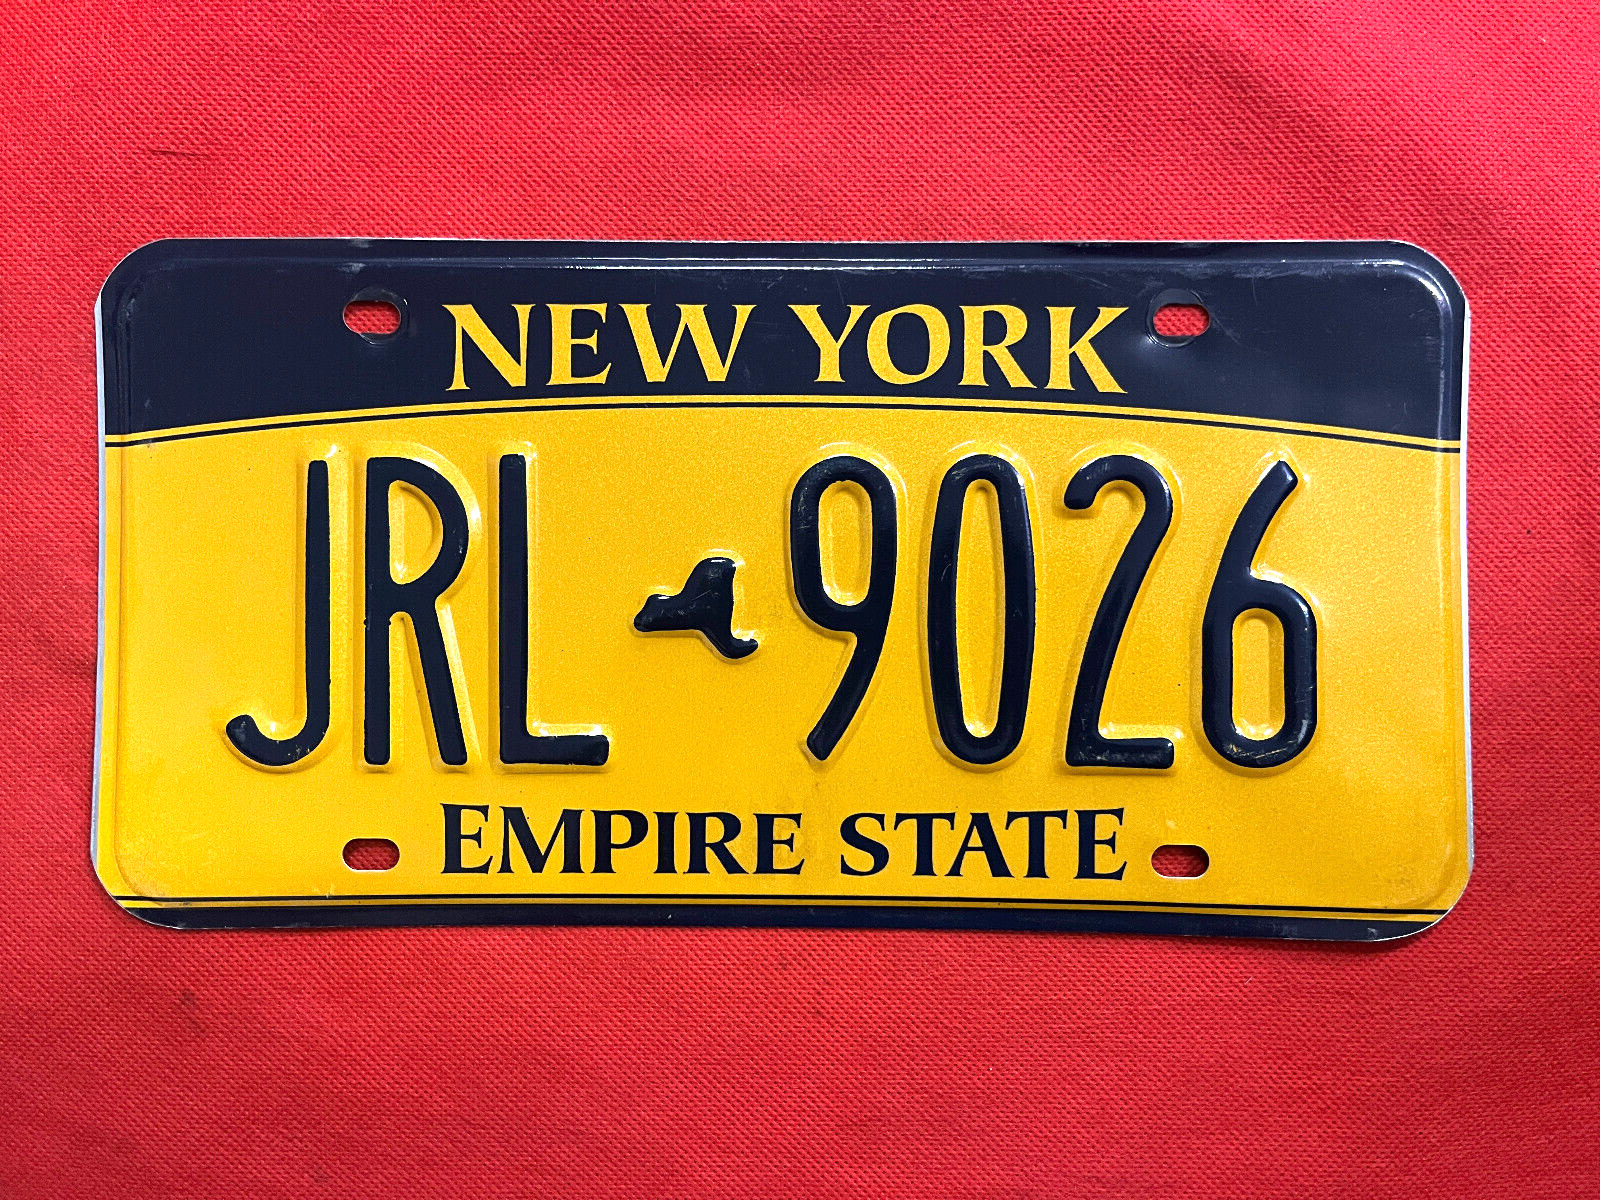 New York License Plate JRL 9026 ....... Expired / Crafts / Collect / Specialty